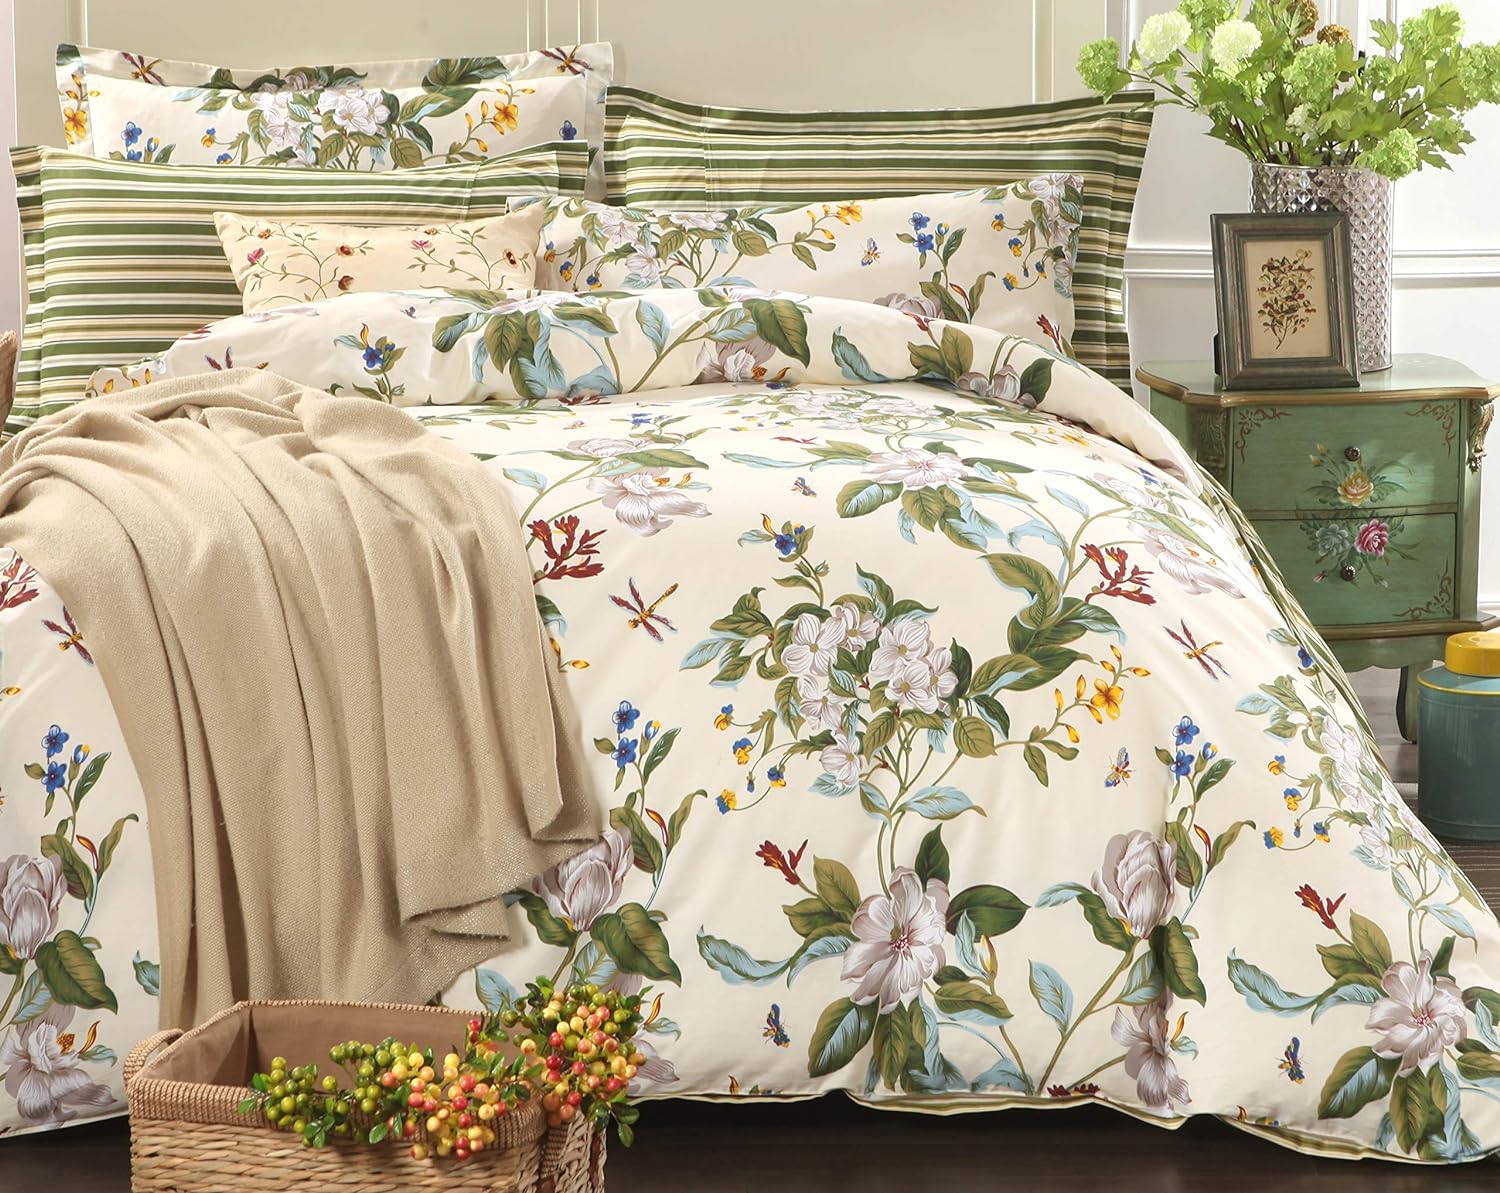 FADFAY Floral Duvet Cover Set 100% Cotton Green and Beige Striped Shabby Flower Bedding Branches Summer Bedding Reversible 600 TC Soft Zipper Comforter Cover & 2 PillowcasesQueen